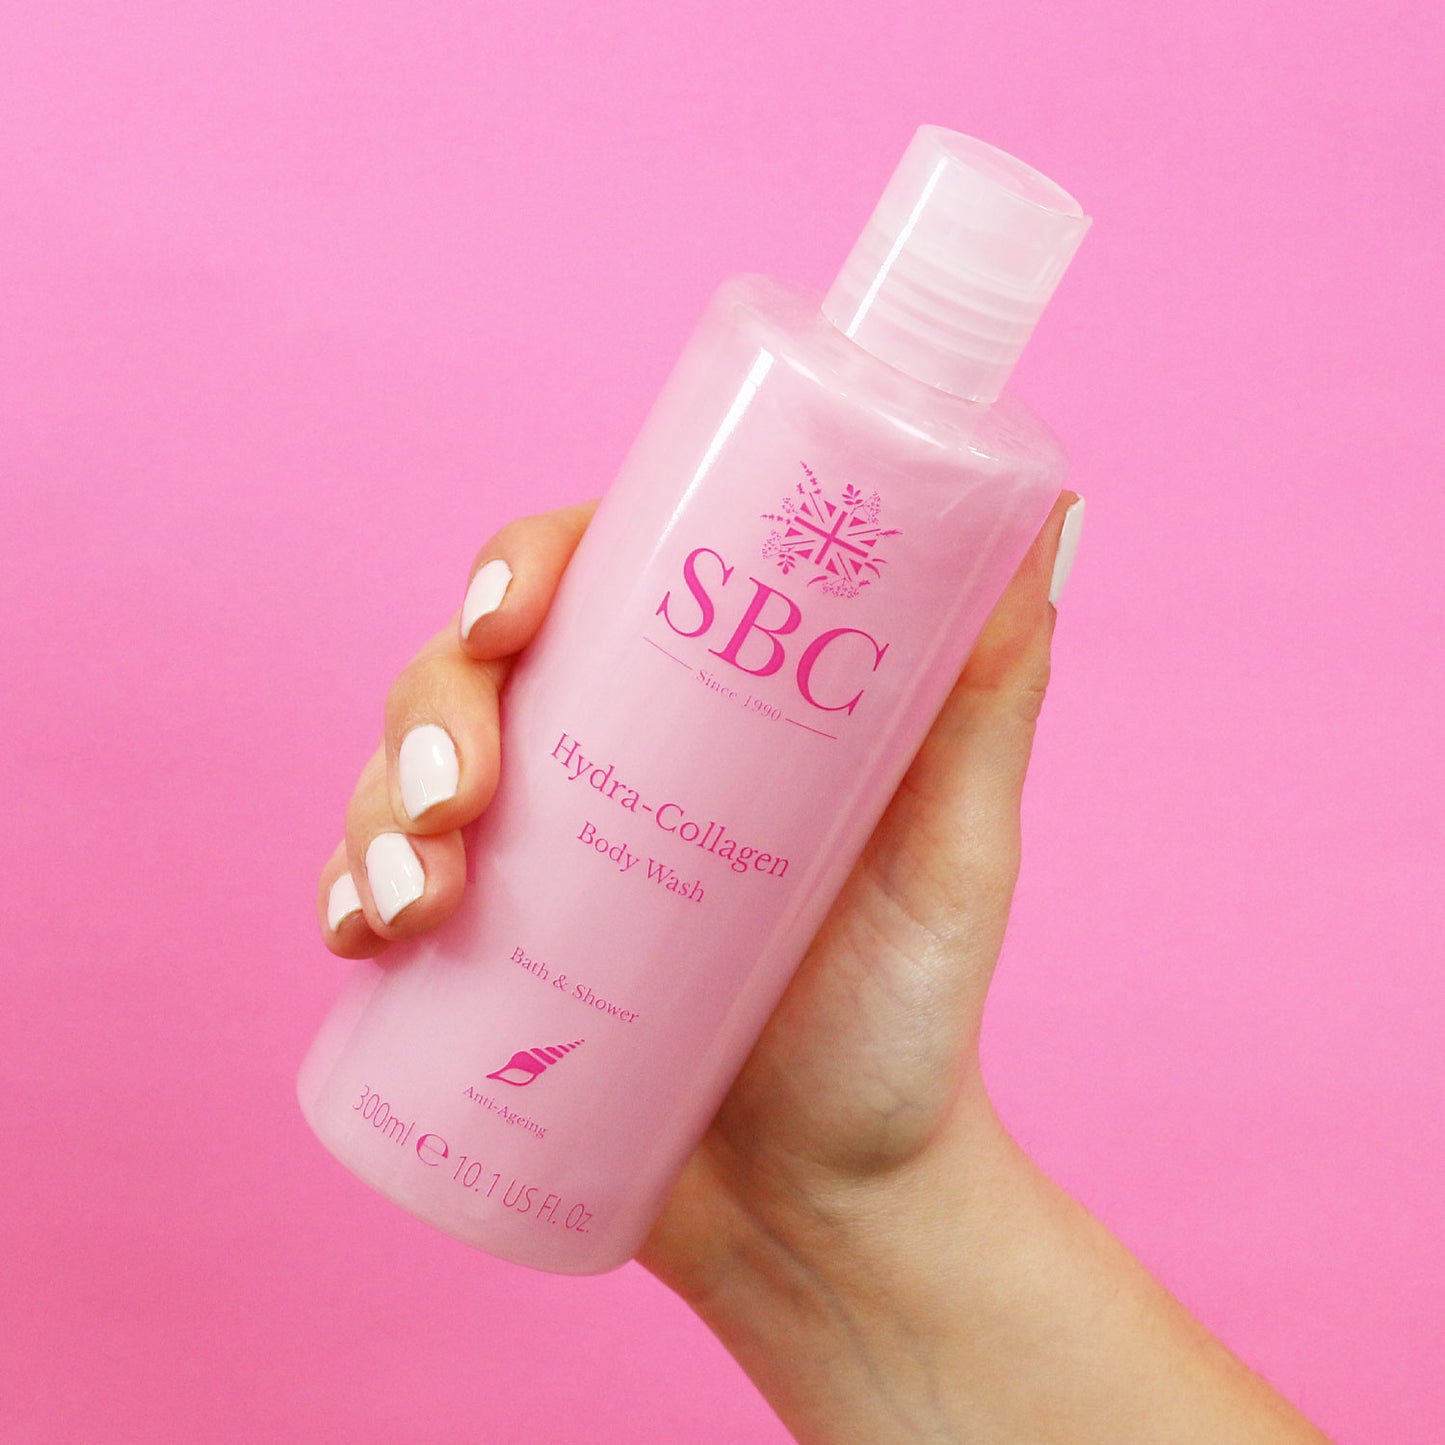 300ml of SBC Skincare's Hydra-Collagen Body Wash being held in front of a pink background 